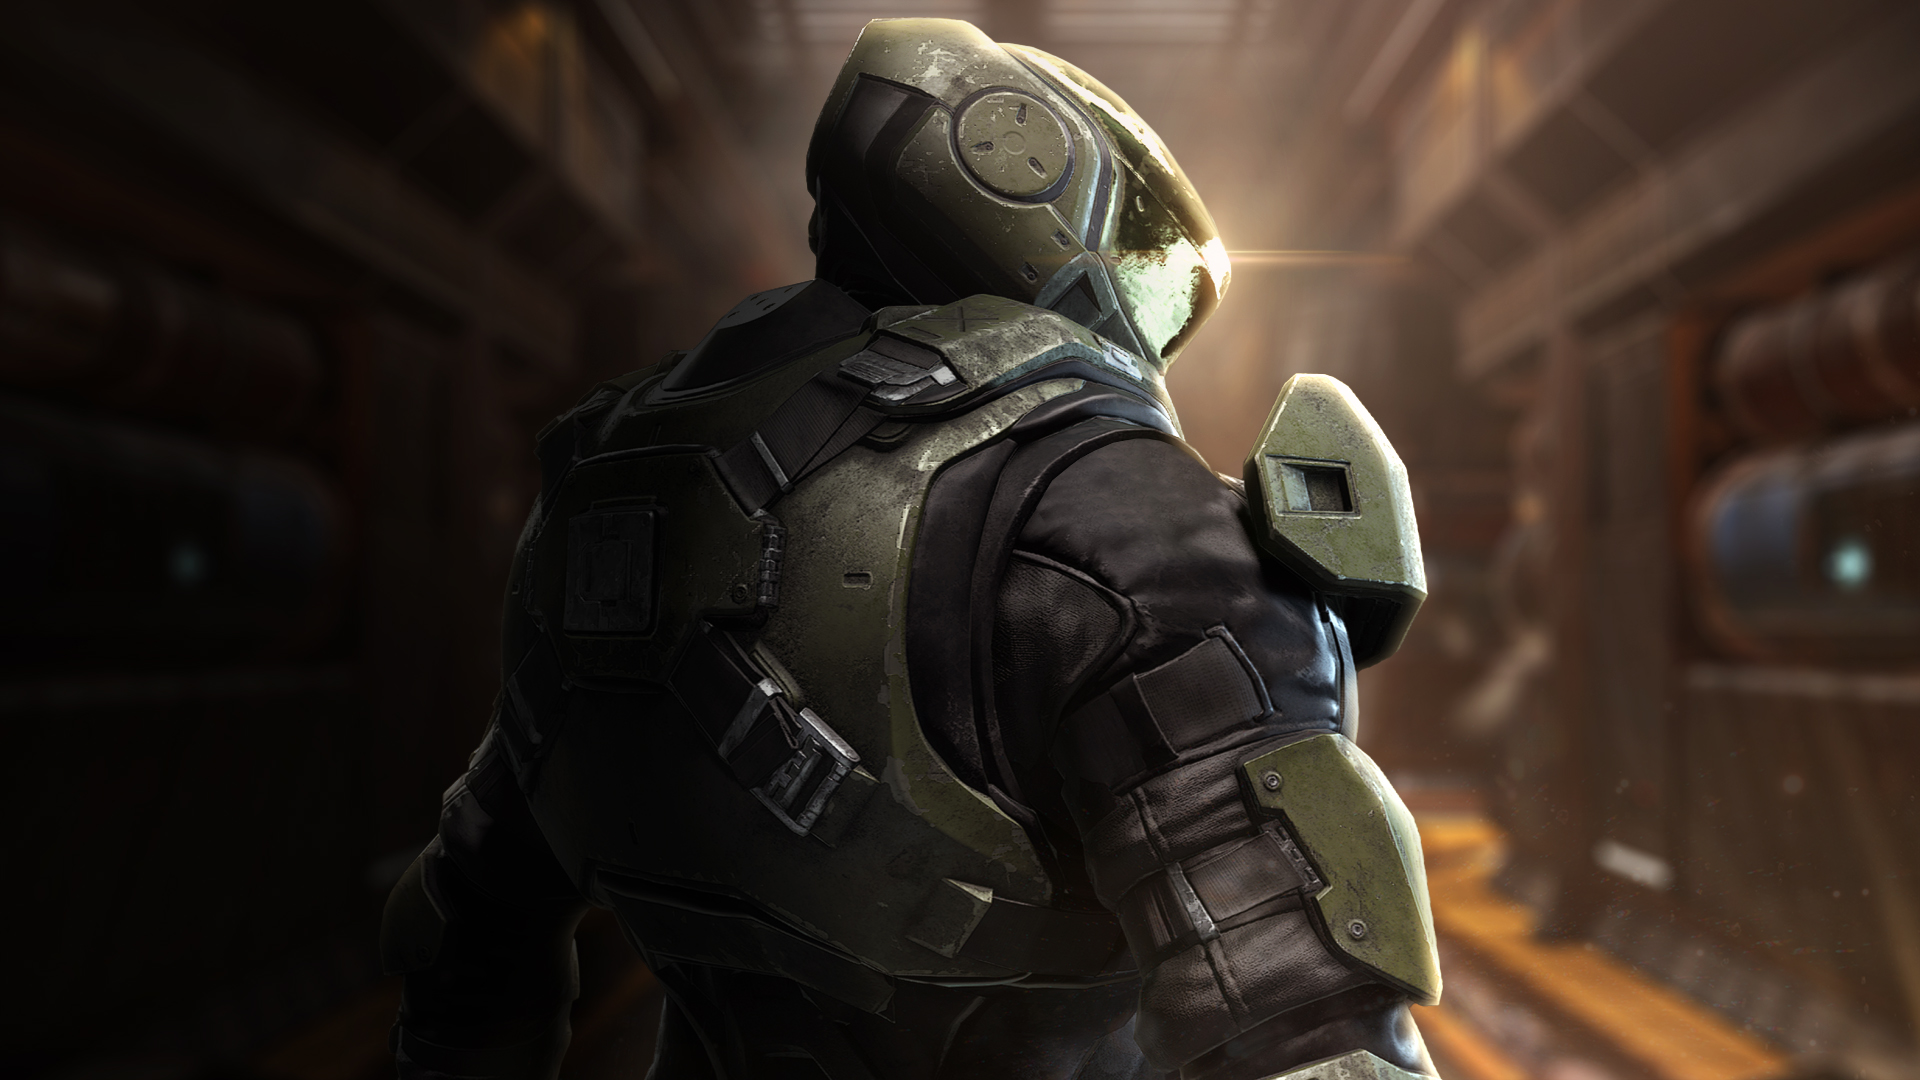 Image of SPI-inspired Mirage armor coming to Halo Infinite in Season 3